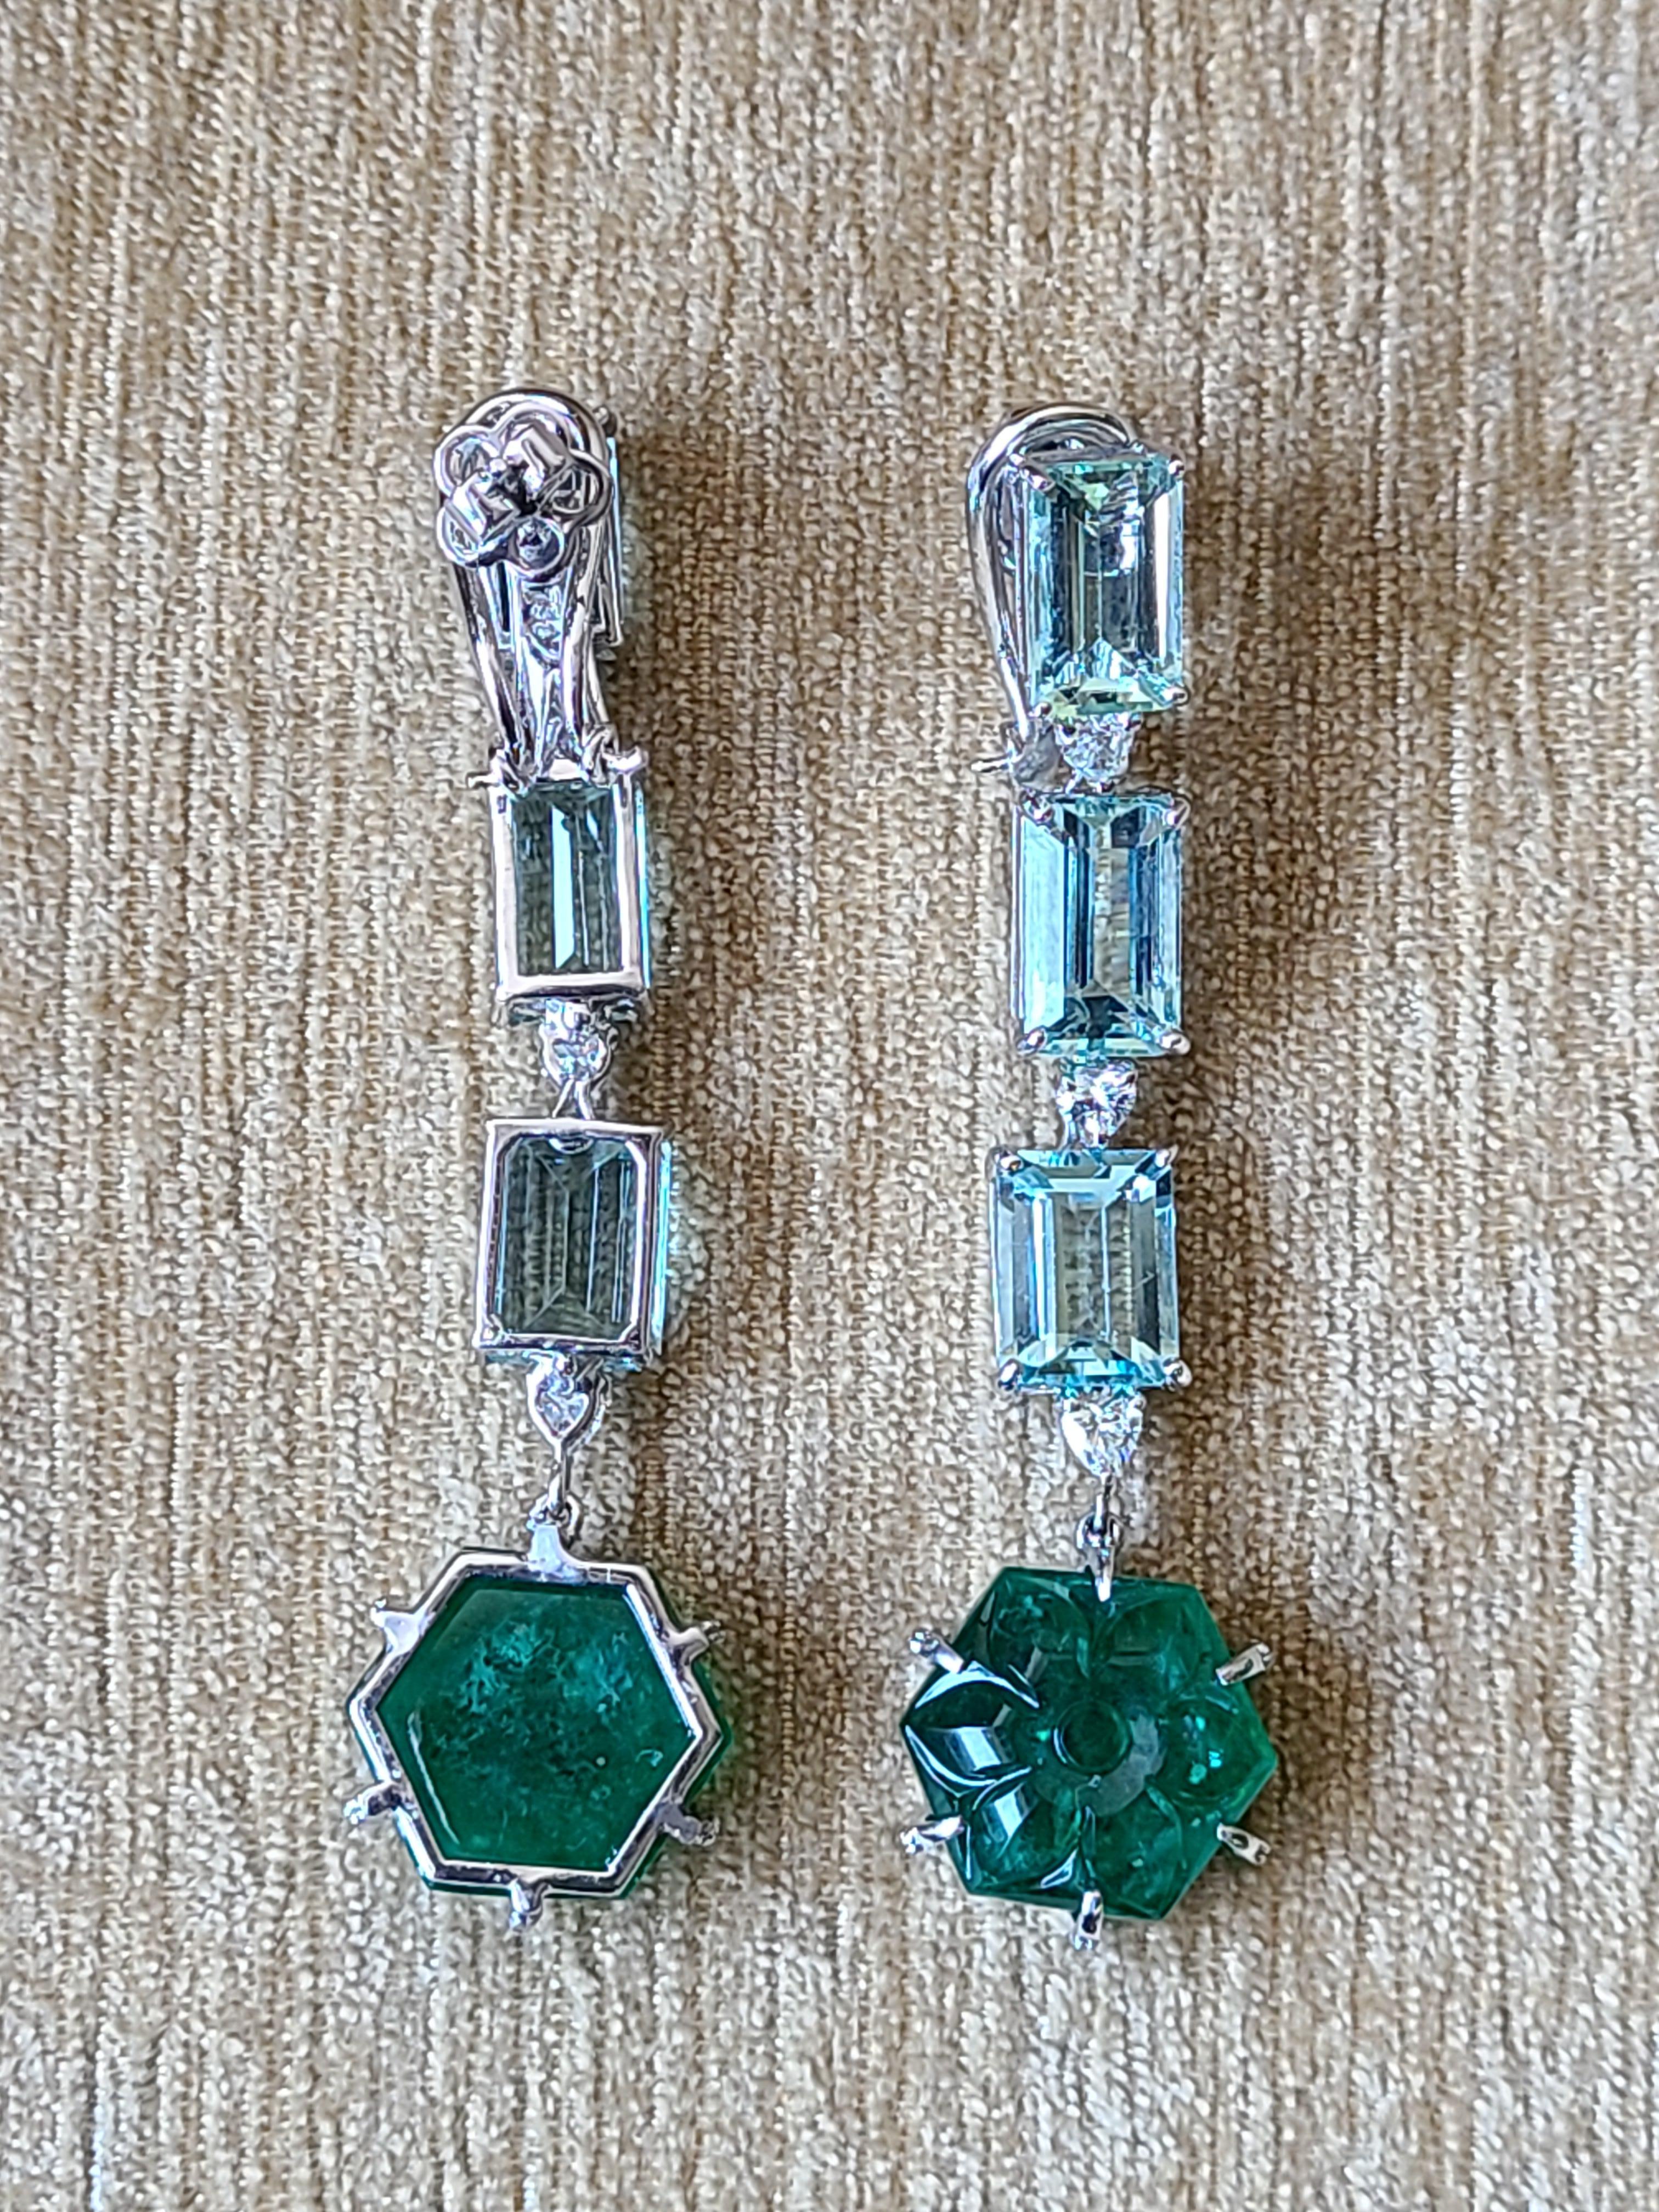 Cabochon Natural Carved Emerald and Aquamarine Earrings Set in 18 Karat Gold with Diamond